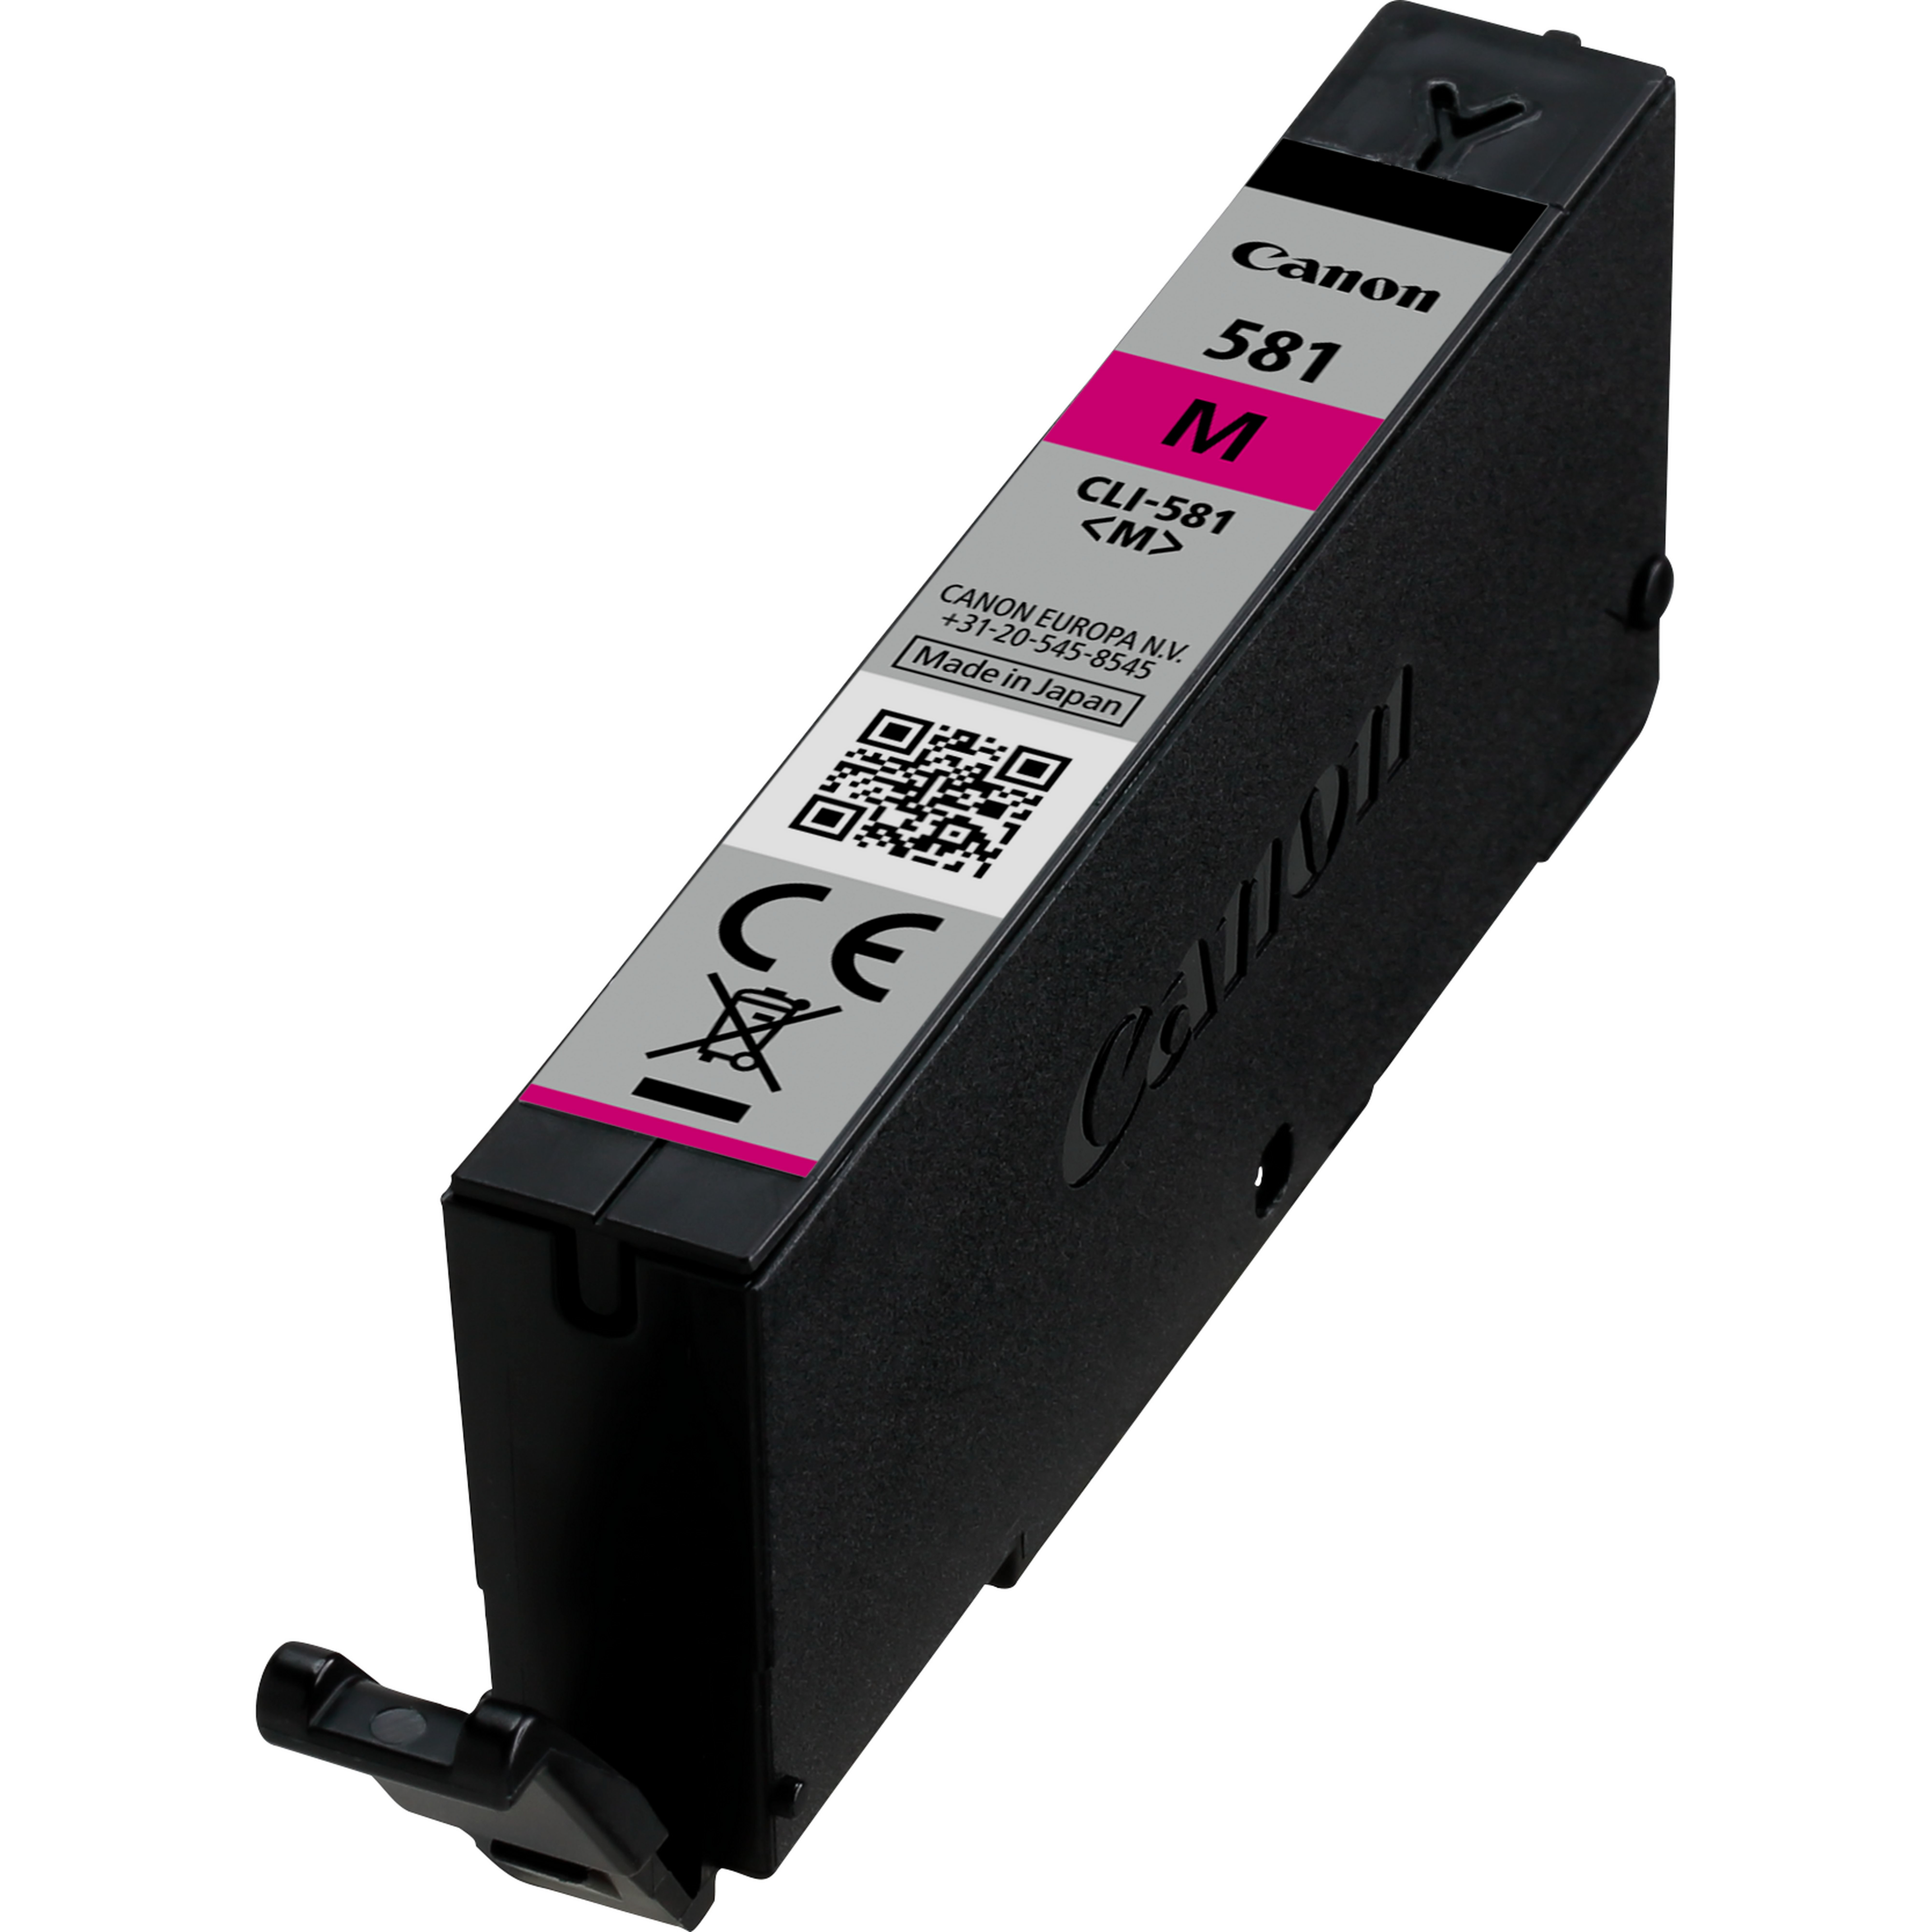 INK CLI-581 M